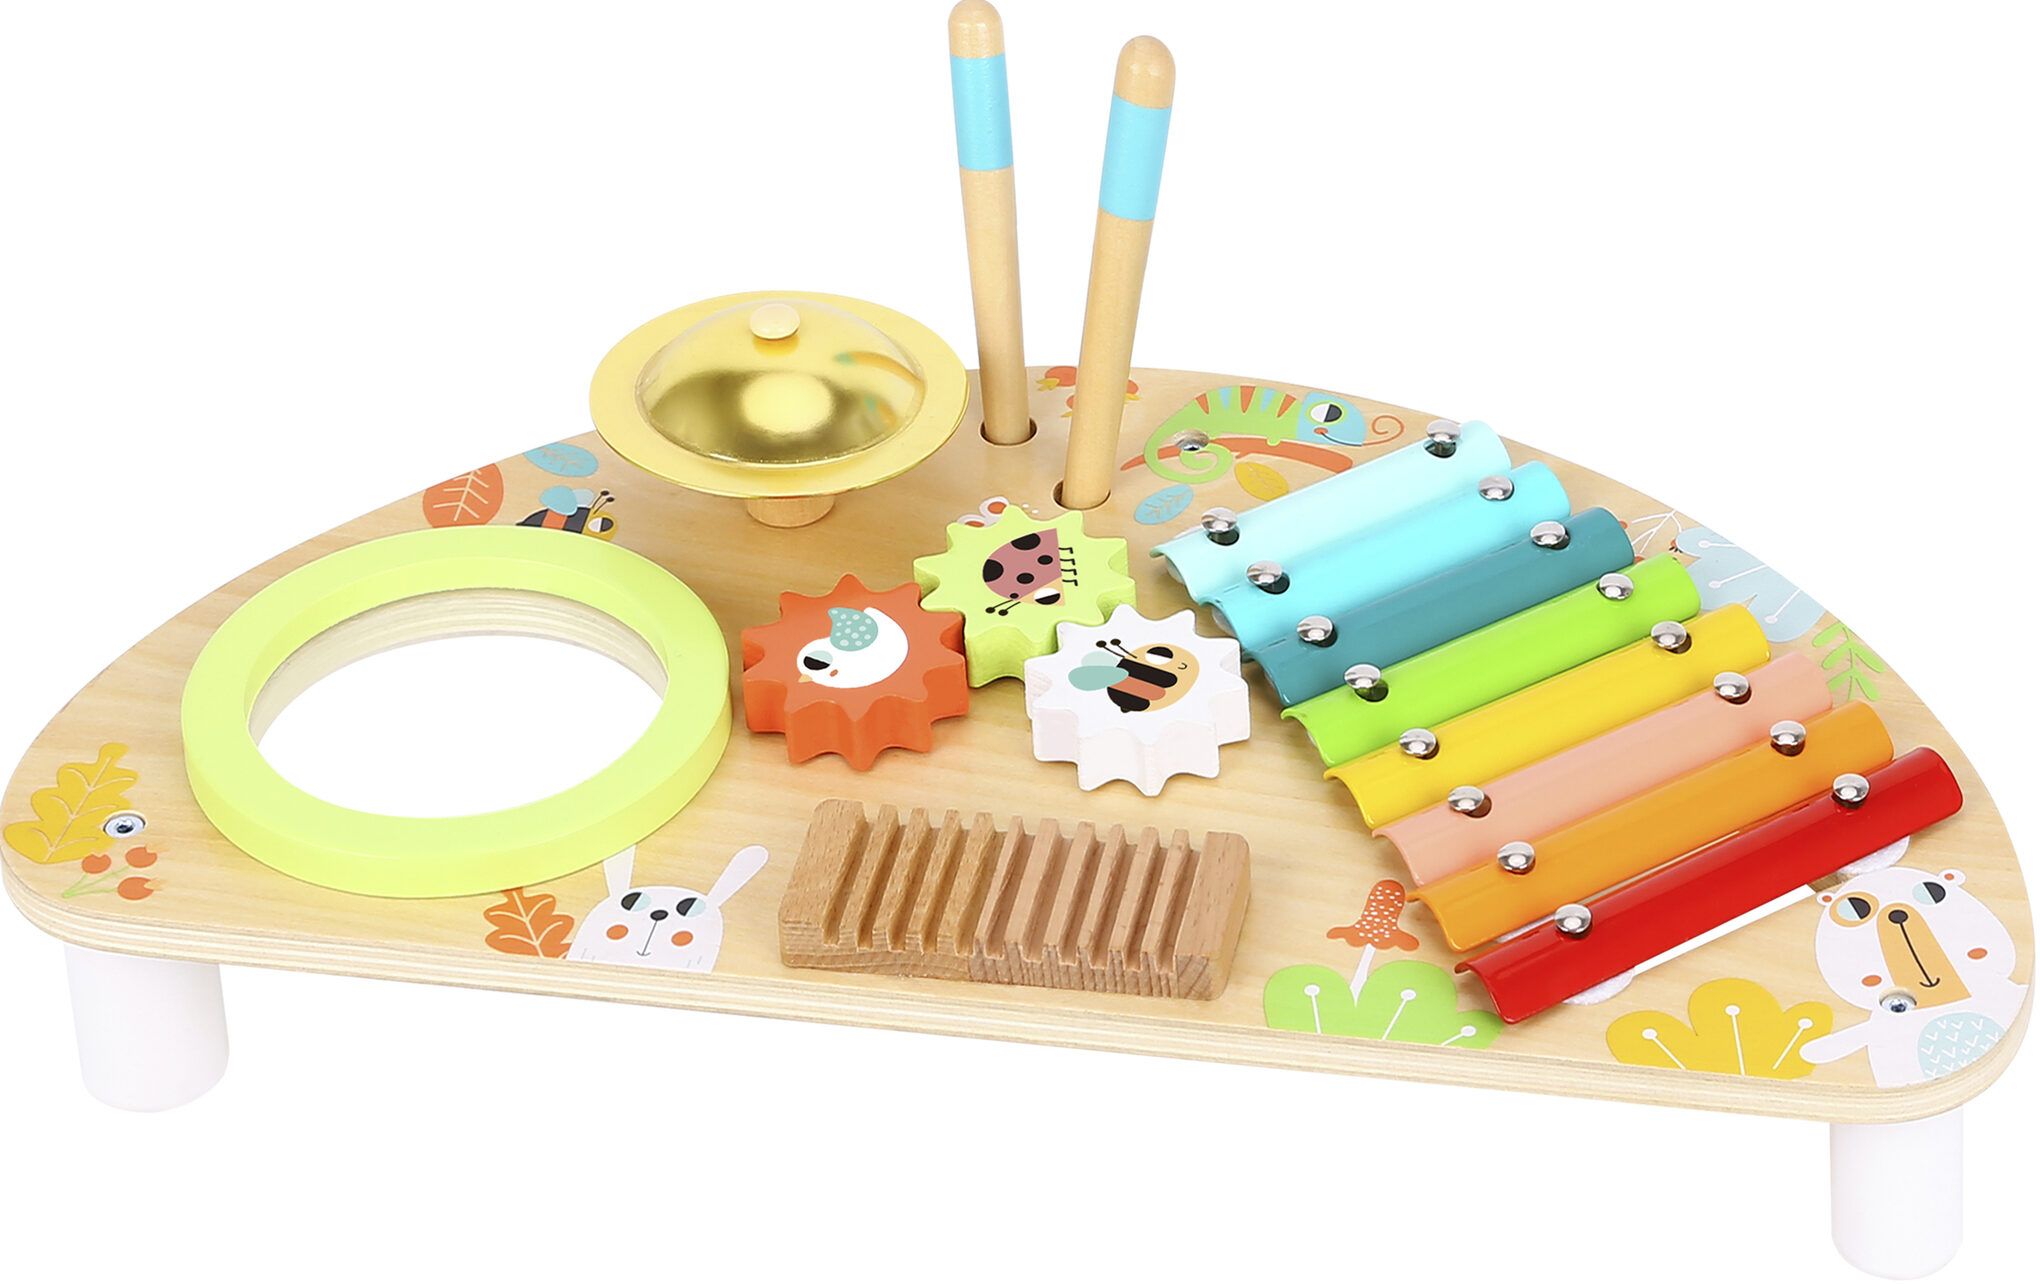 wooden multi function music centre - toys for music skills in children - shop wooden sets from tooky toys